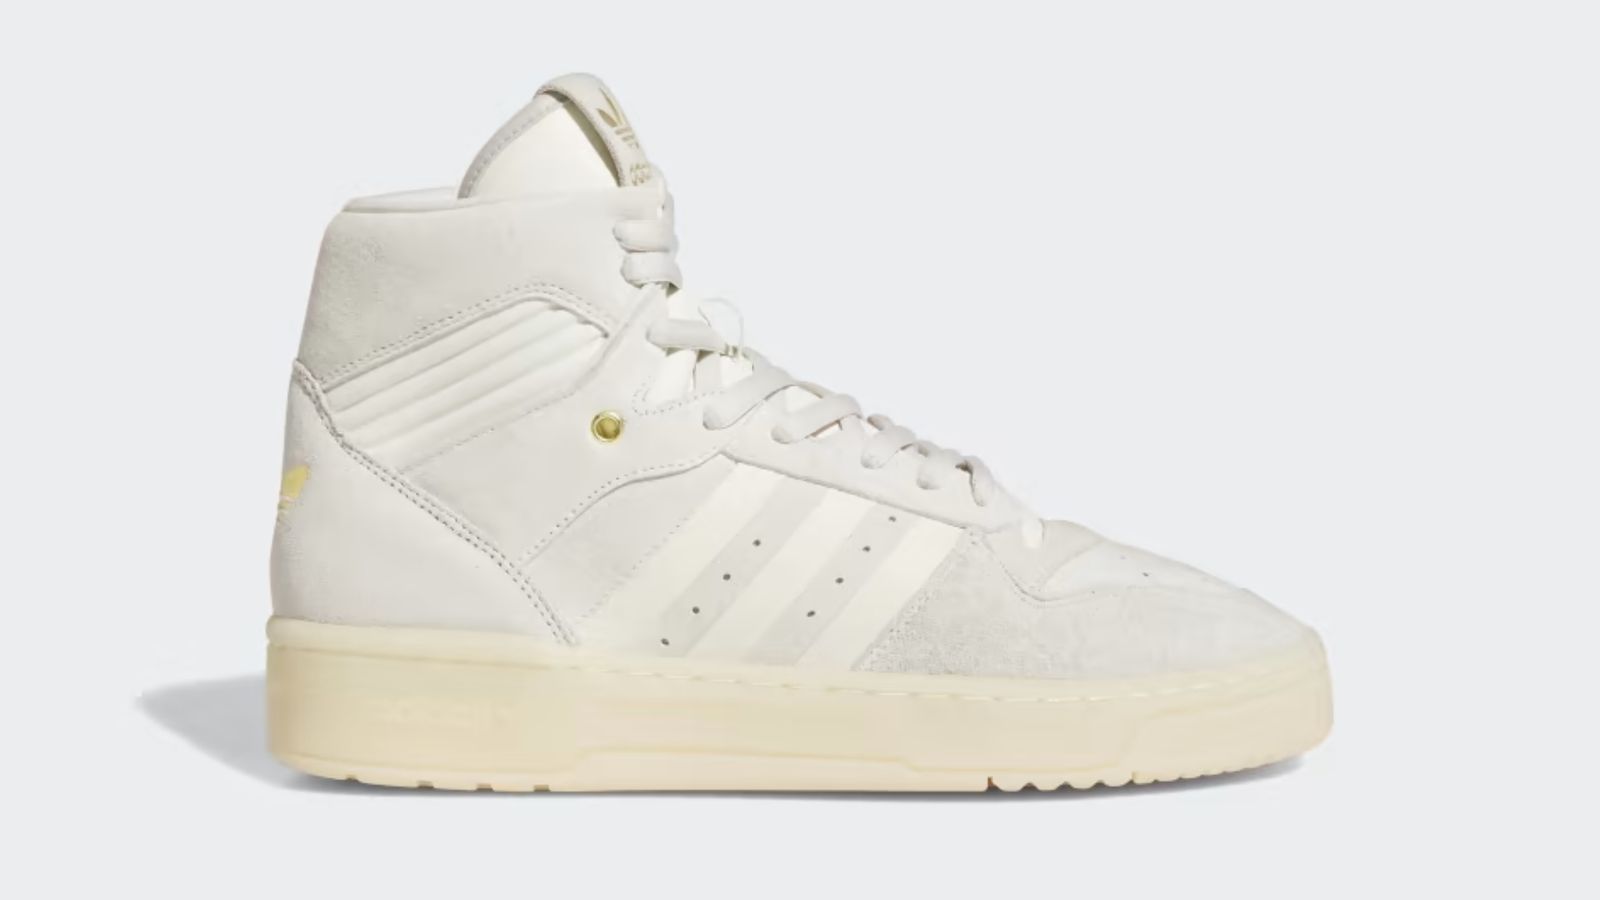 adidas Rivalry High "Cream White" product image of an off-white and cream high-top with a pre-yellowed midsole.